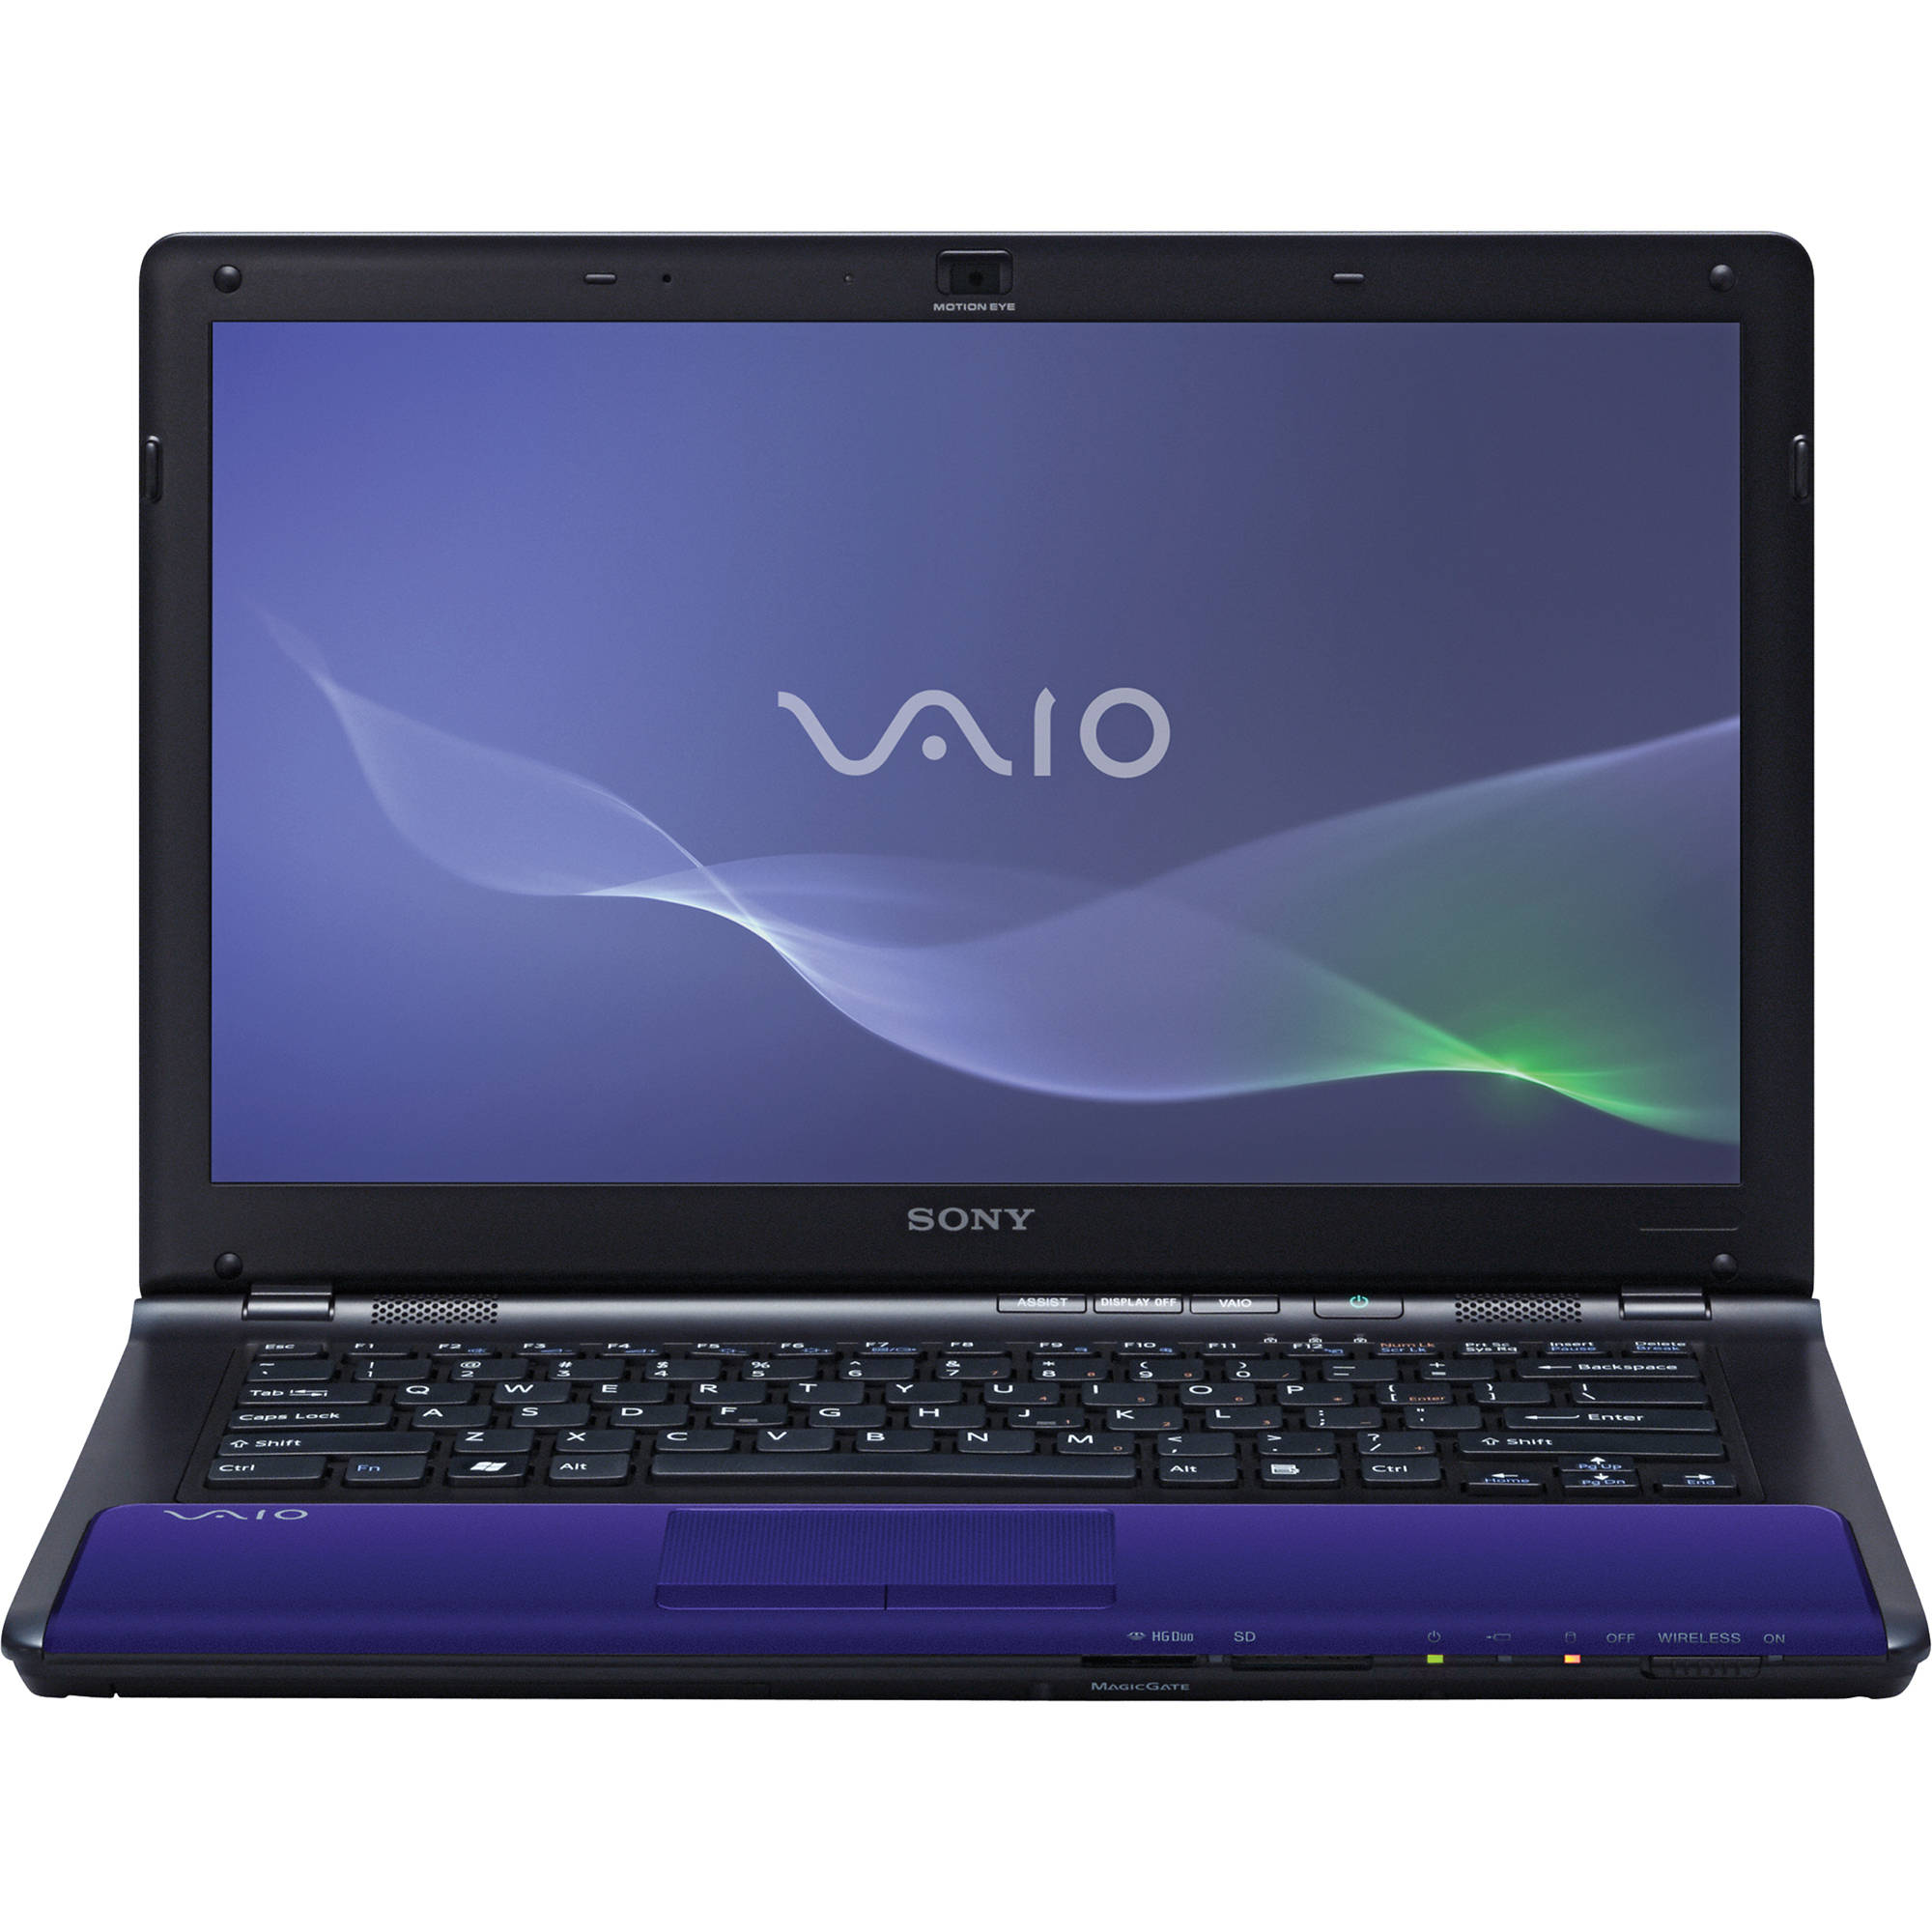 base system device driver download sony vaio